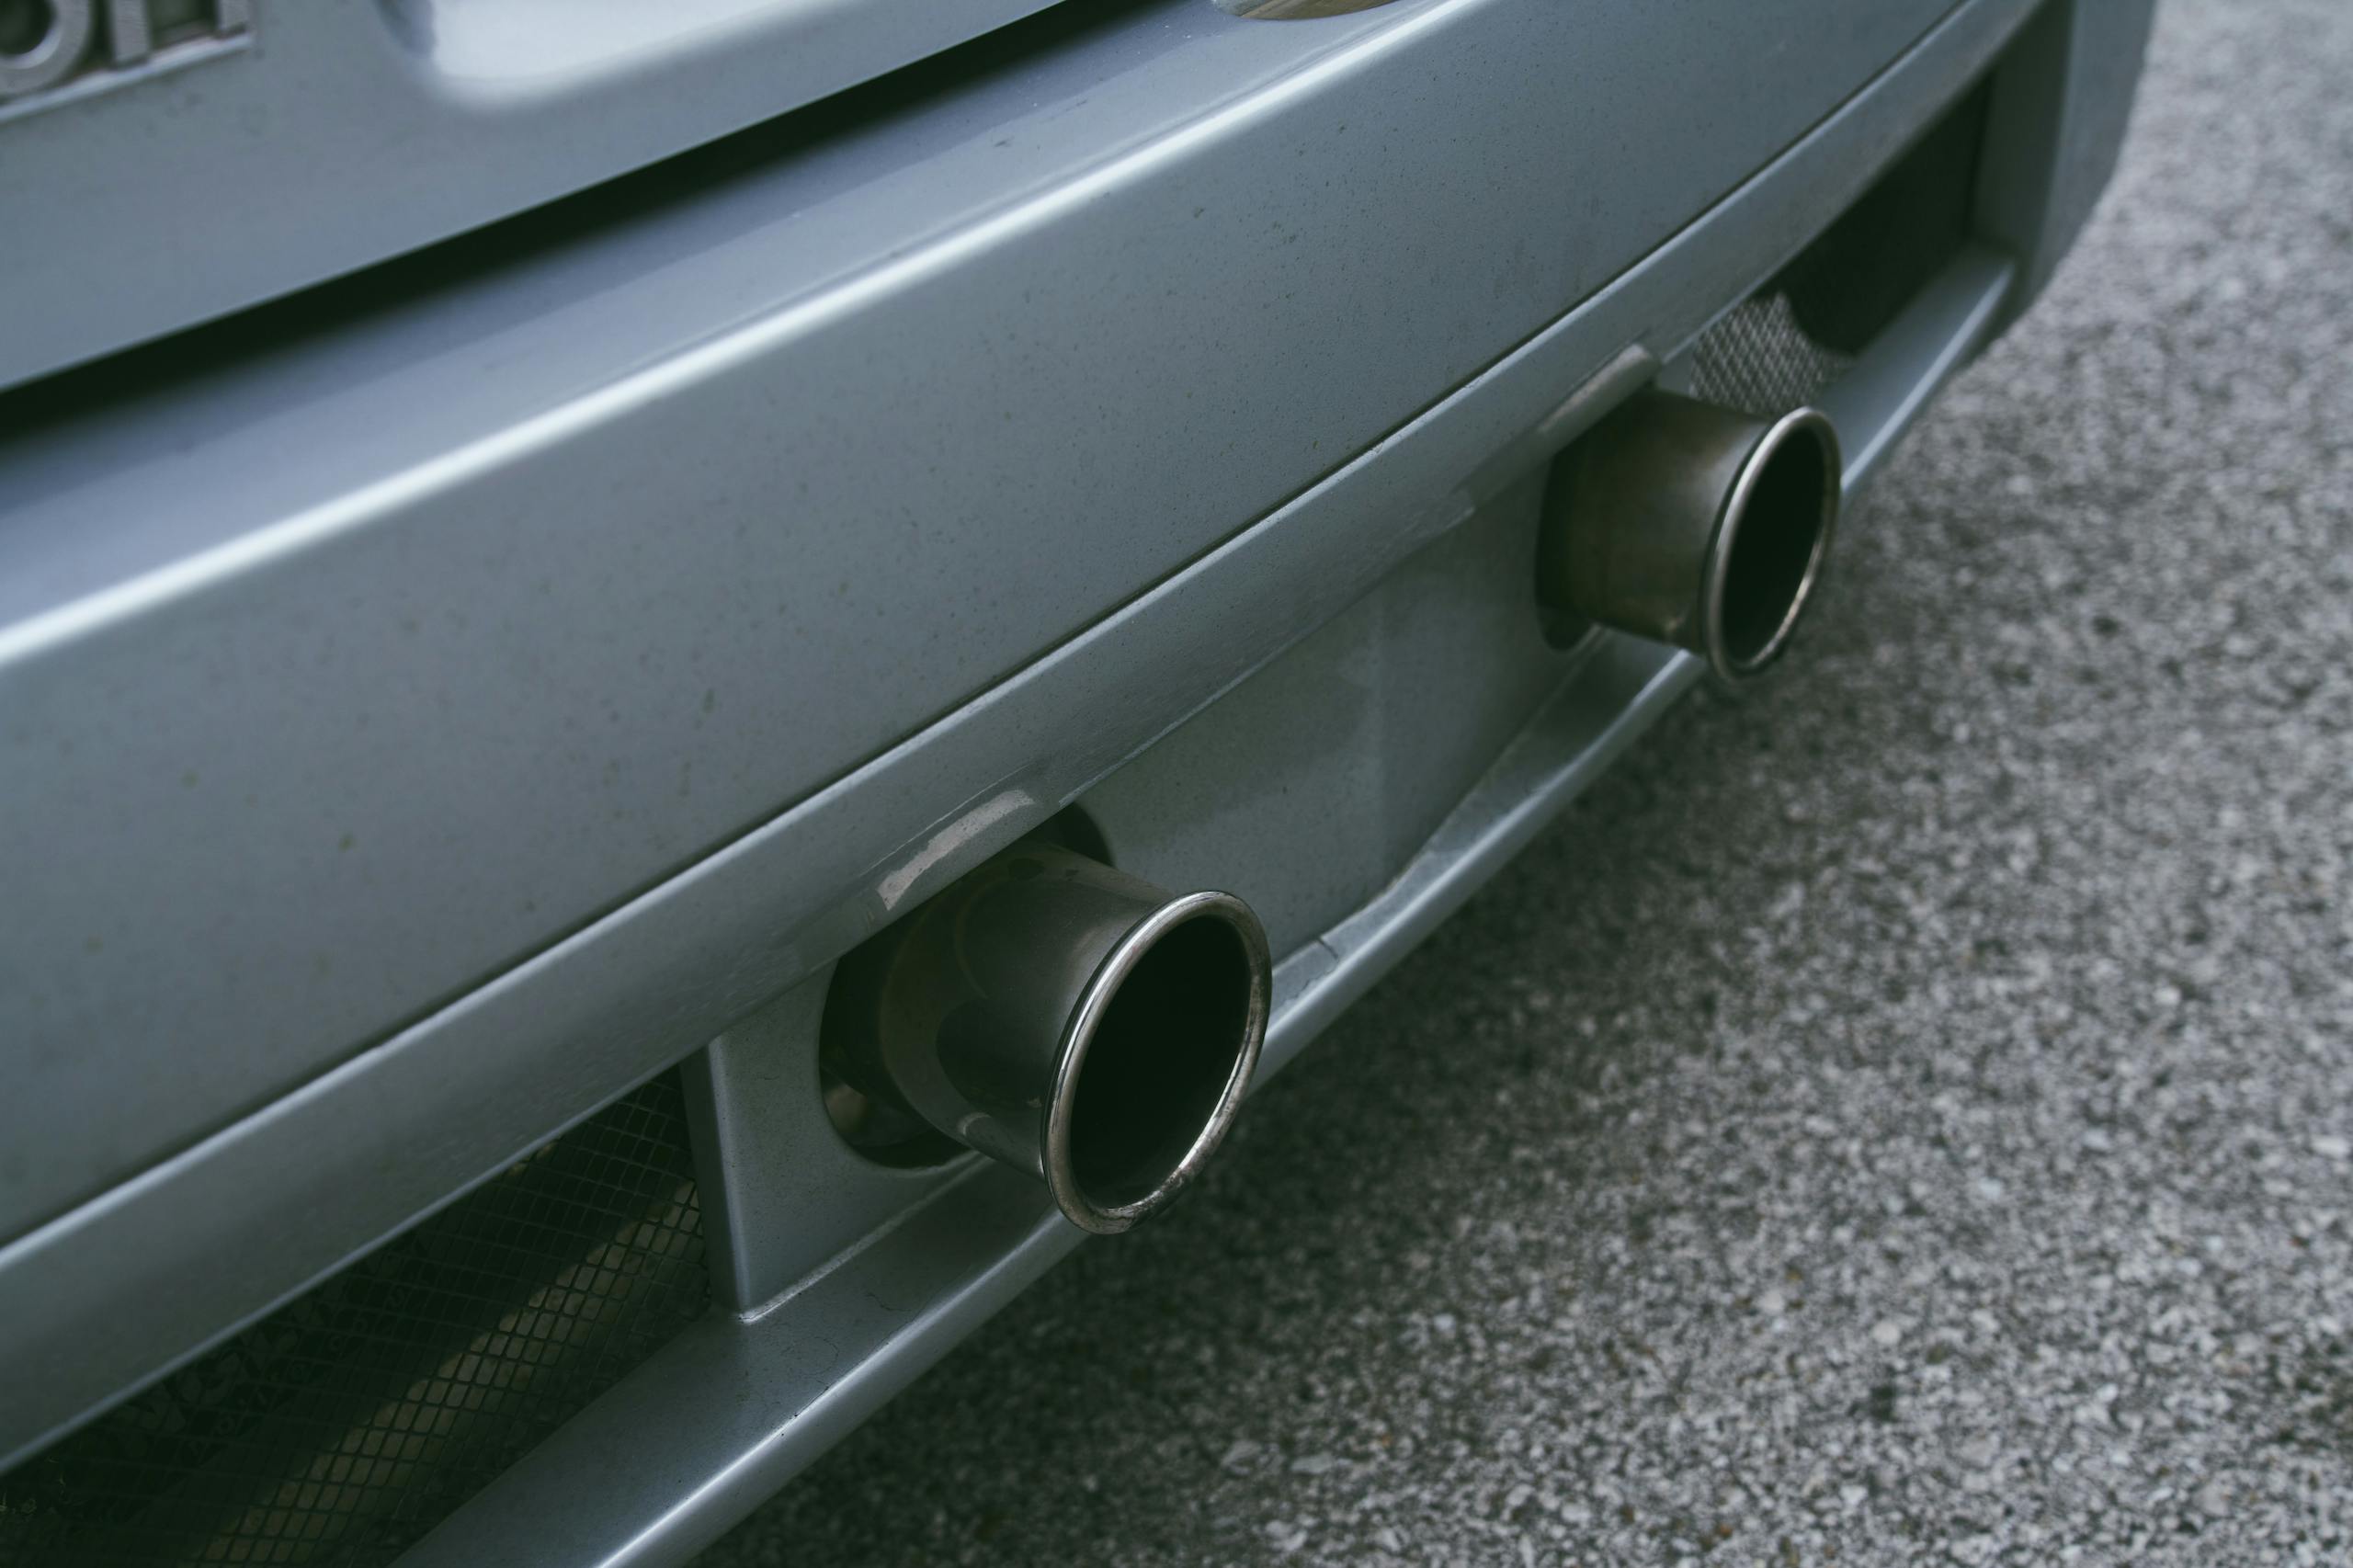 2002 Renault Clio V6 rear tailpipe detail